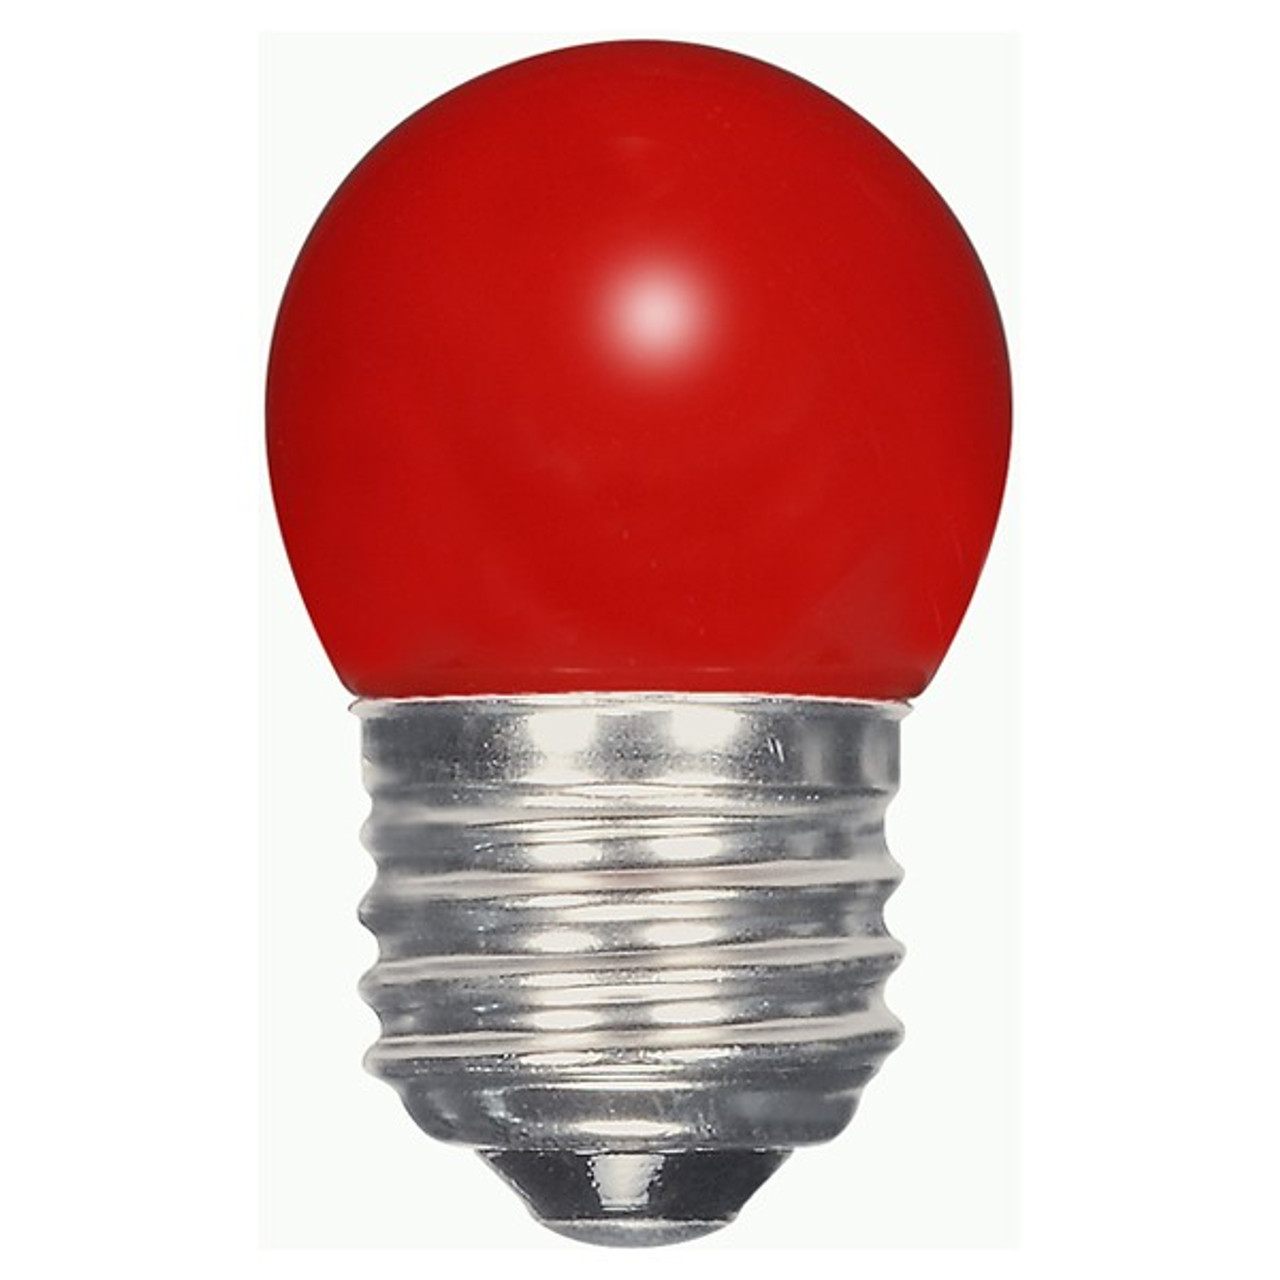 1.2 WATT S11 LED LAMP RED 27K (EQUAL TO 10W) - SATCO #S9165